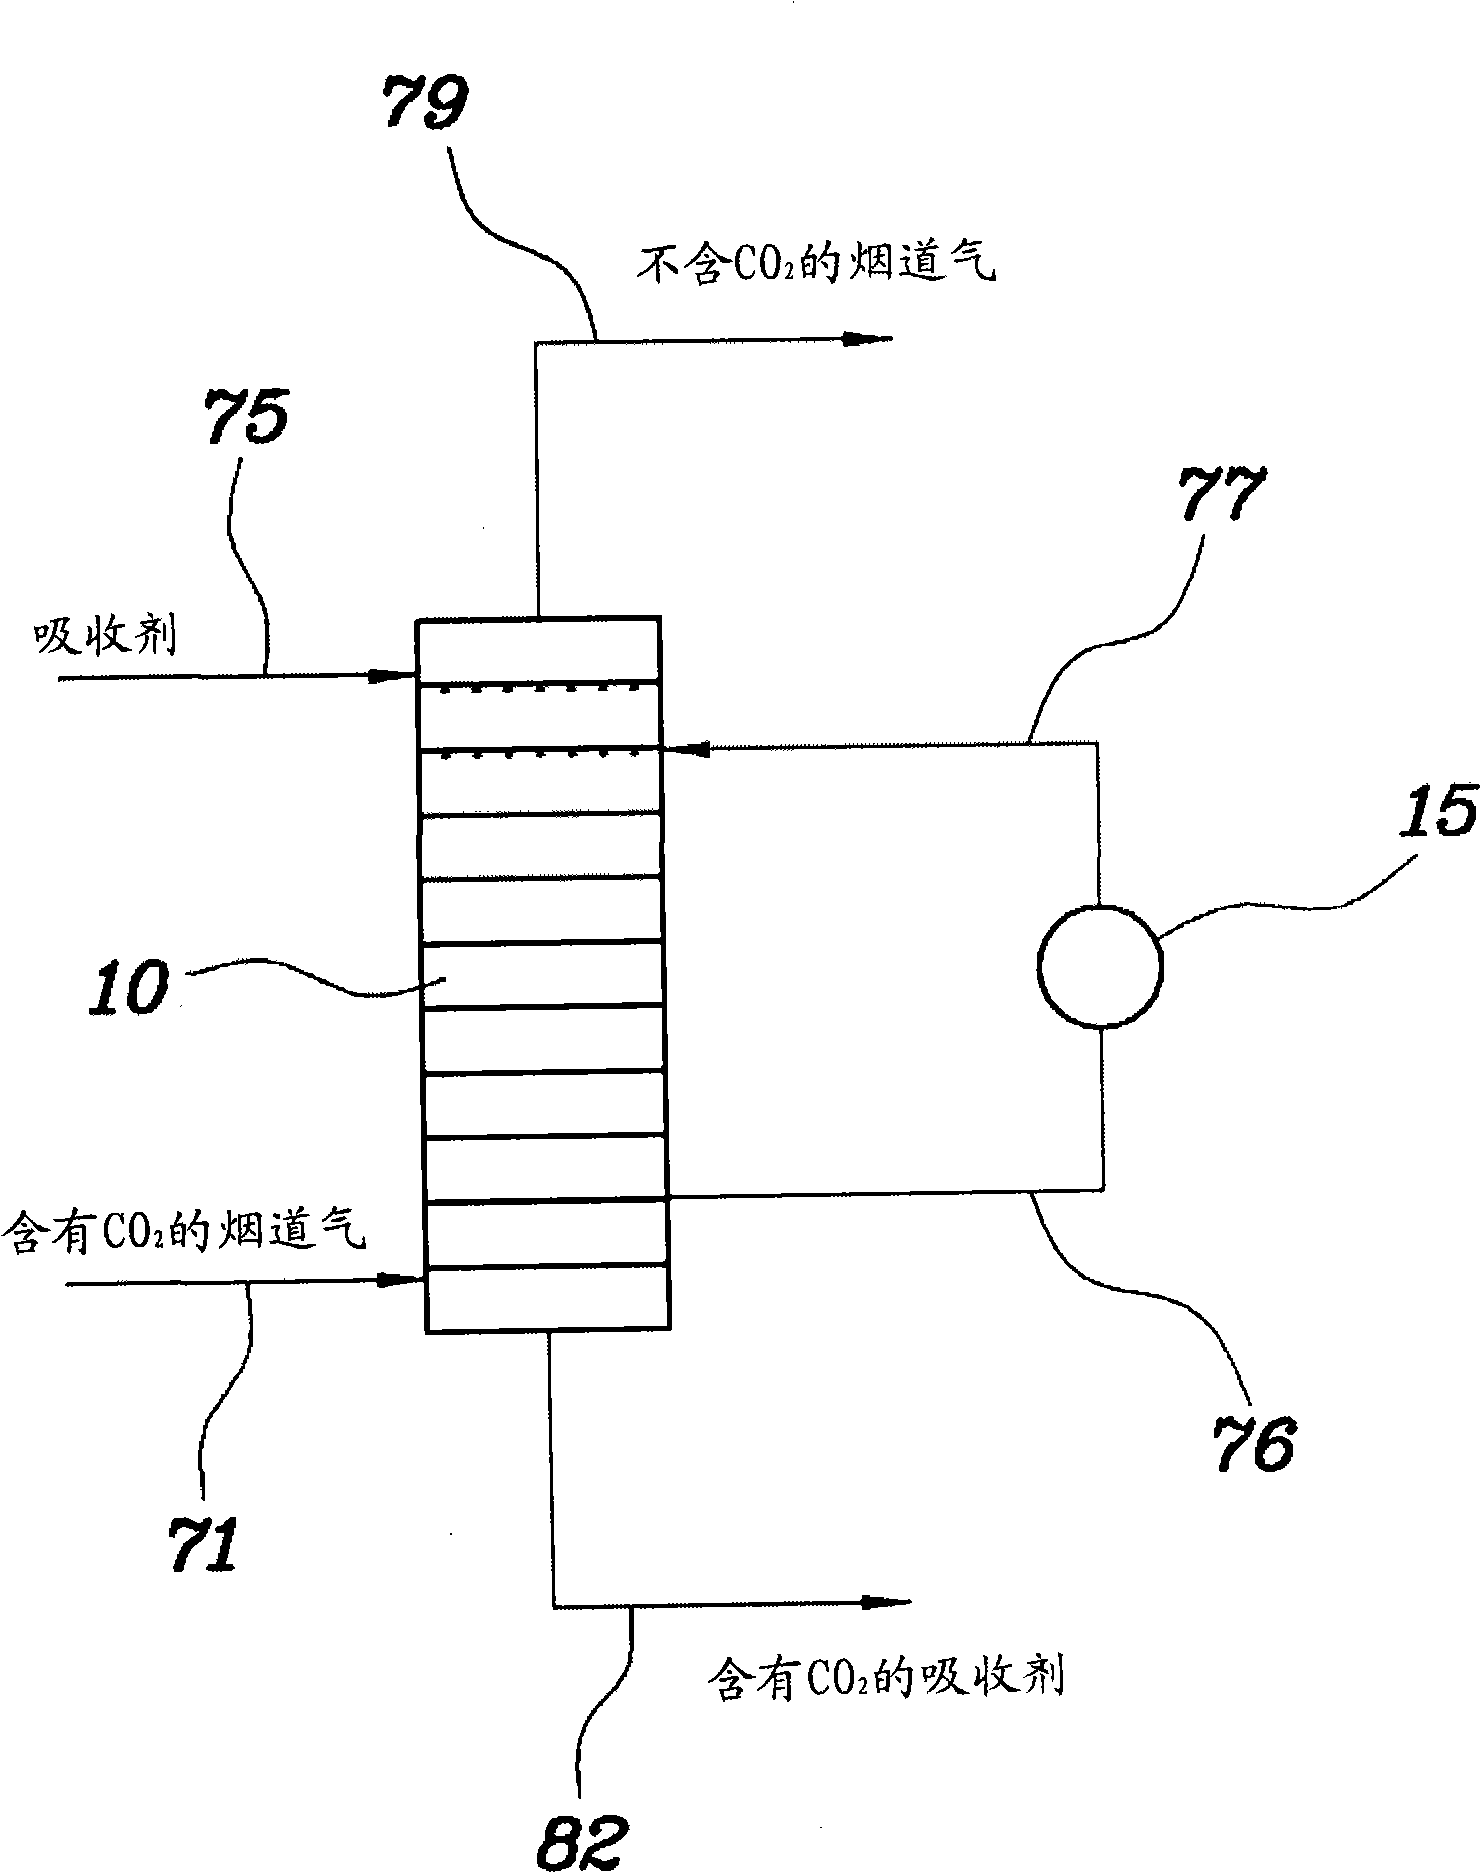 Apparatus and method for recovering carbon dioxide from flue gas using ammonia water